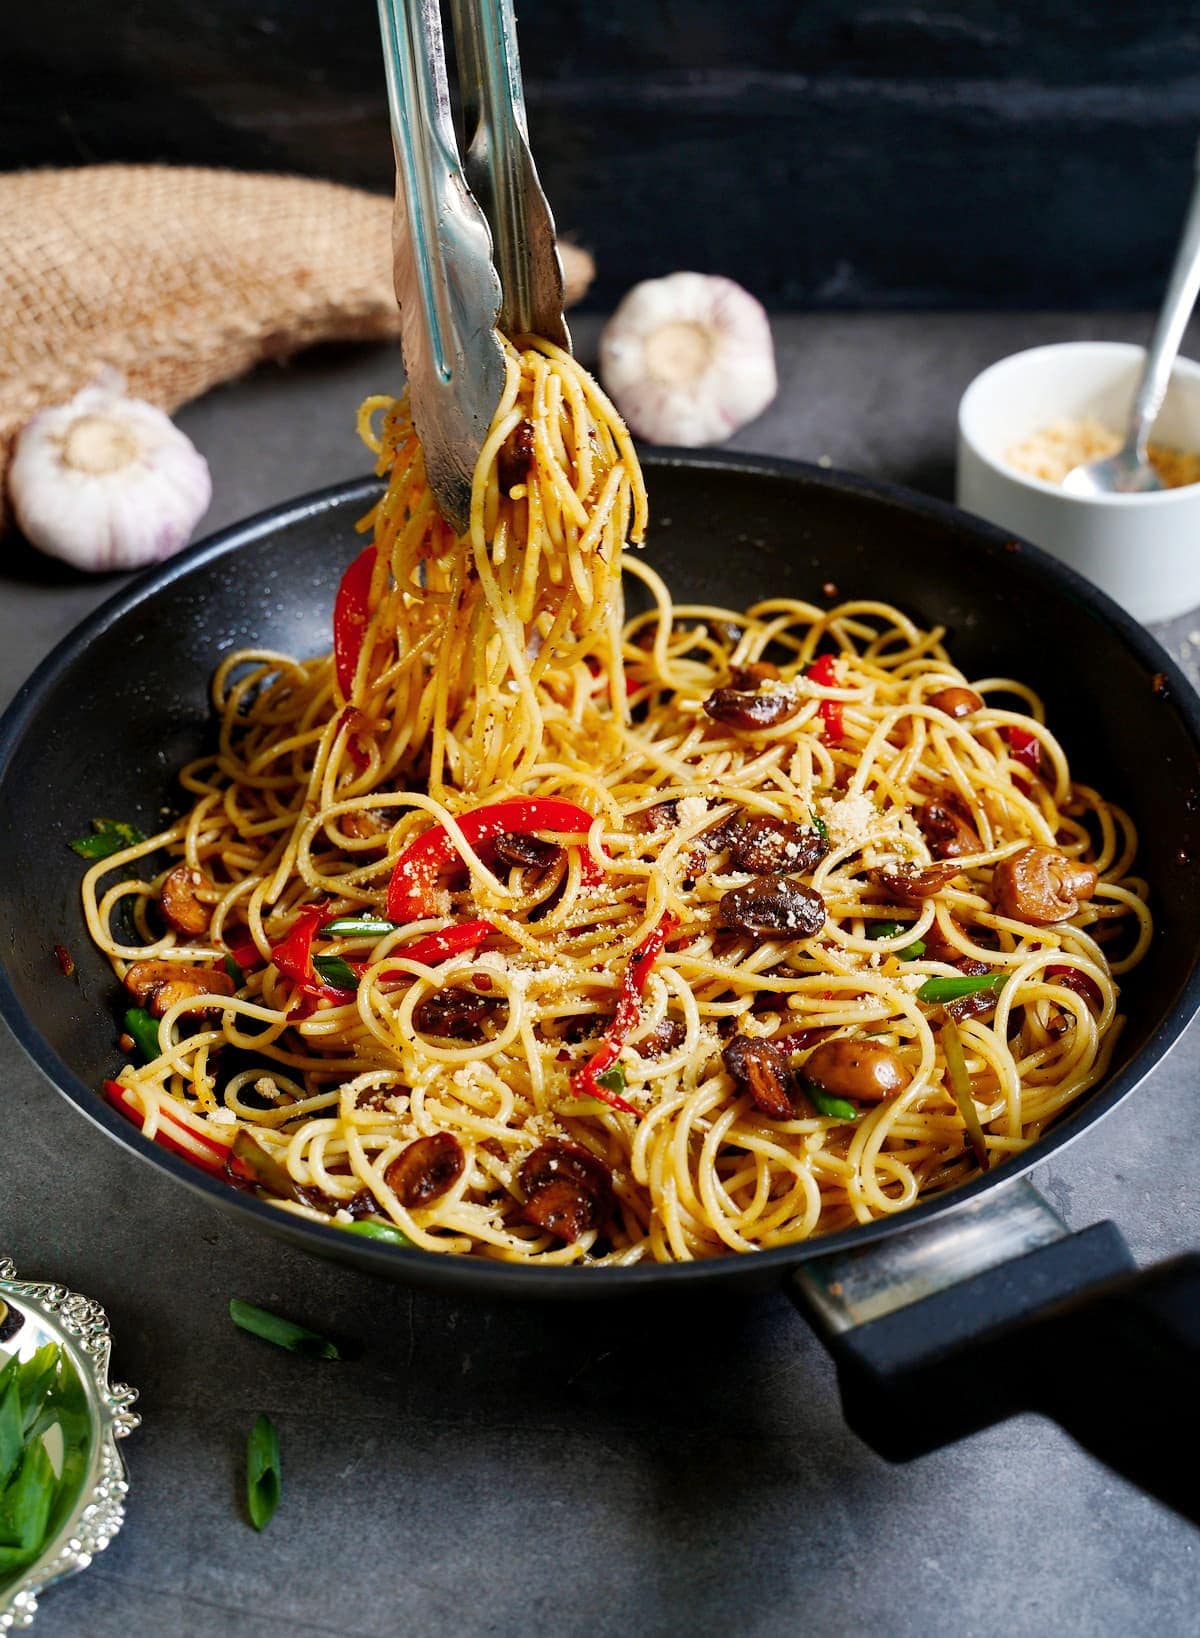 garlic noodles in black skillet with veggies and tongs